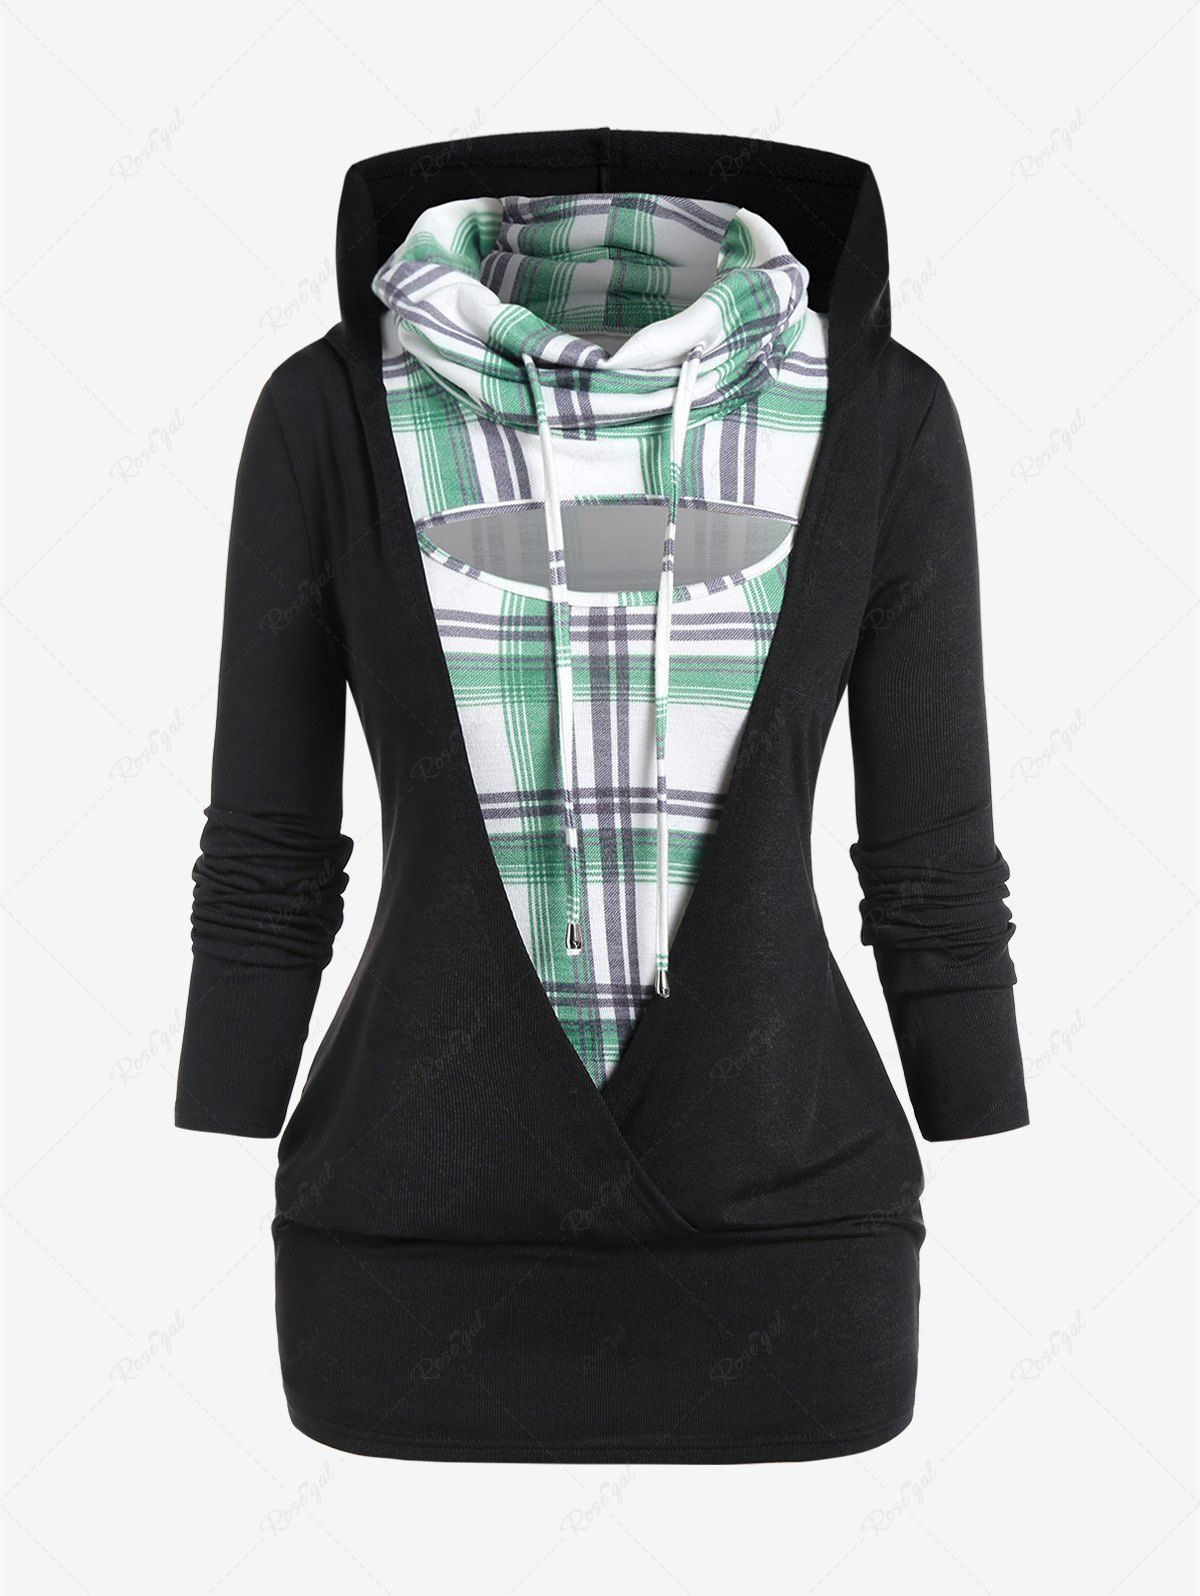 Discount Plus Size Cowl Neck Peek and Boo Plaid 2 in 1 Top  